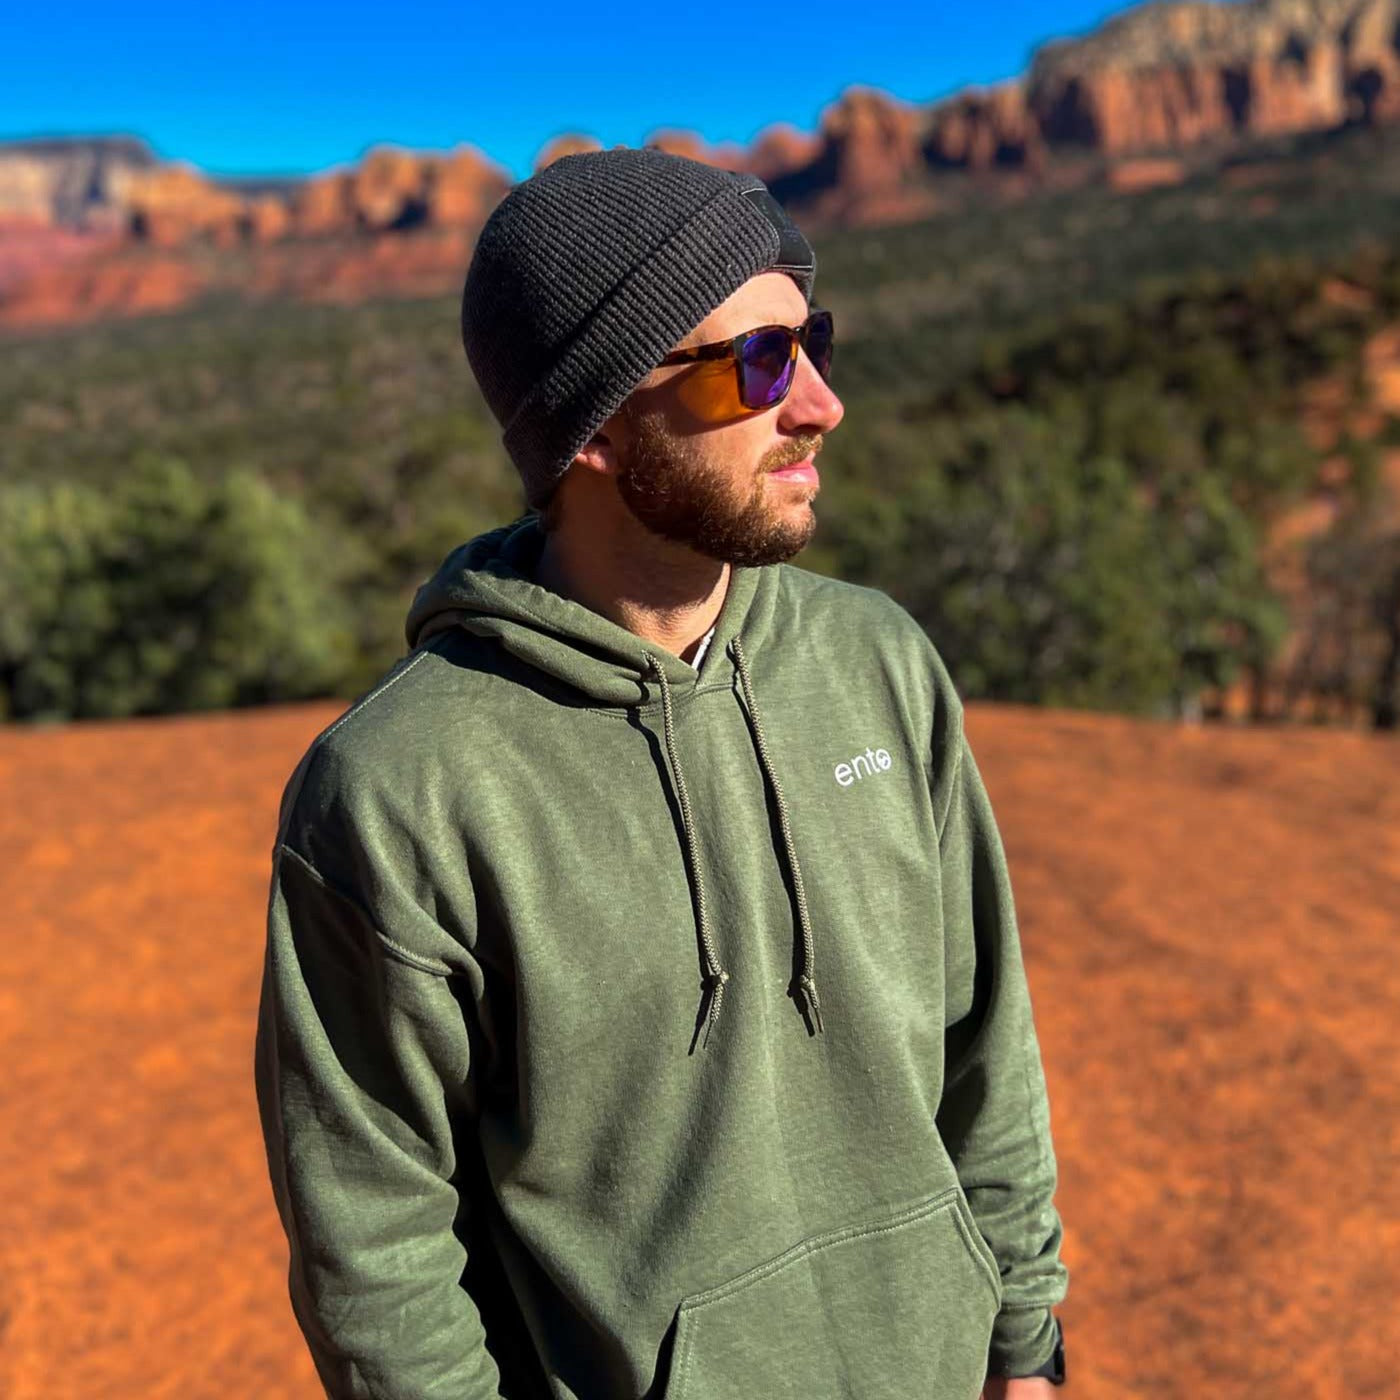 Ultra-Soft Unisex Mountaineer Hoodie - Ento Apparel